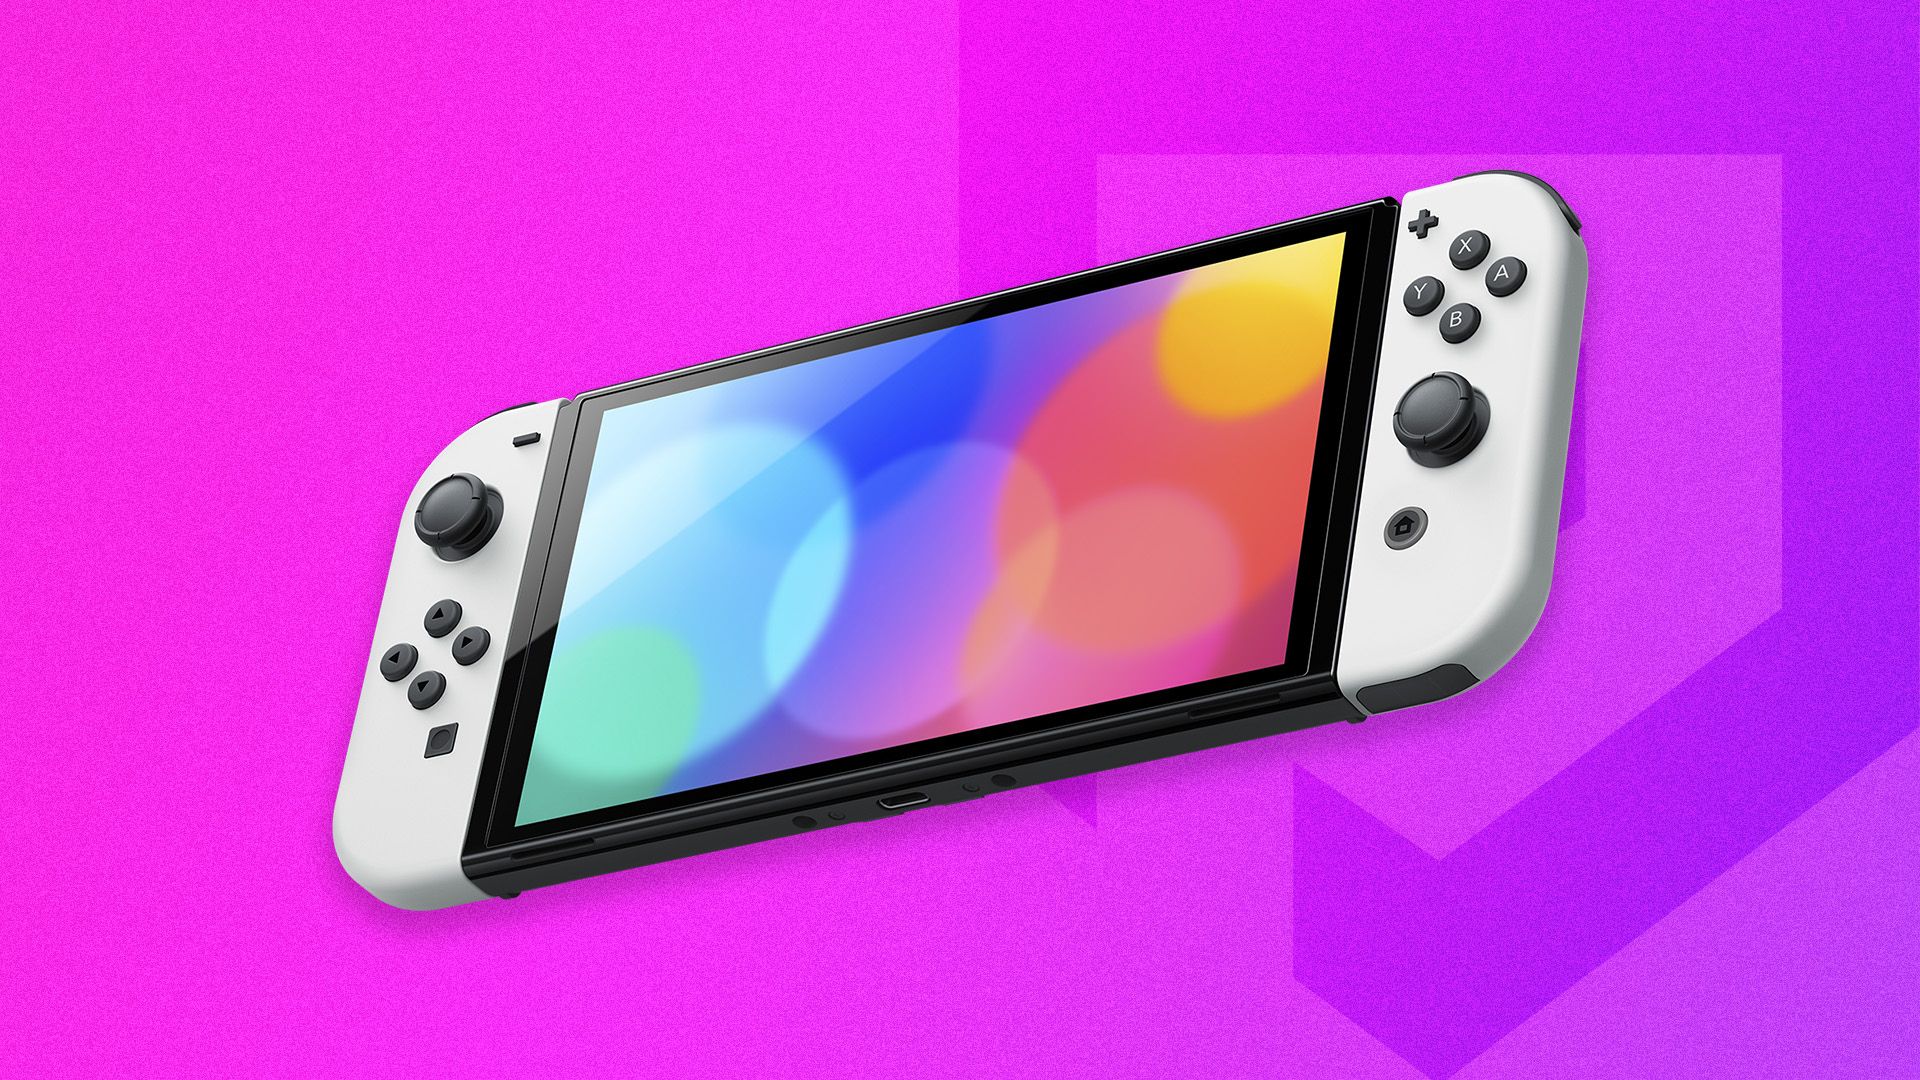 Best Nintendo Switch Lite games  11 top titles to take on the go